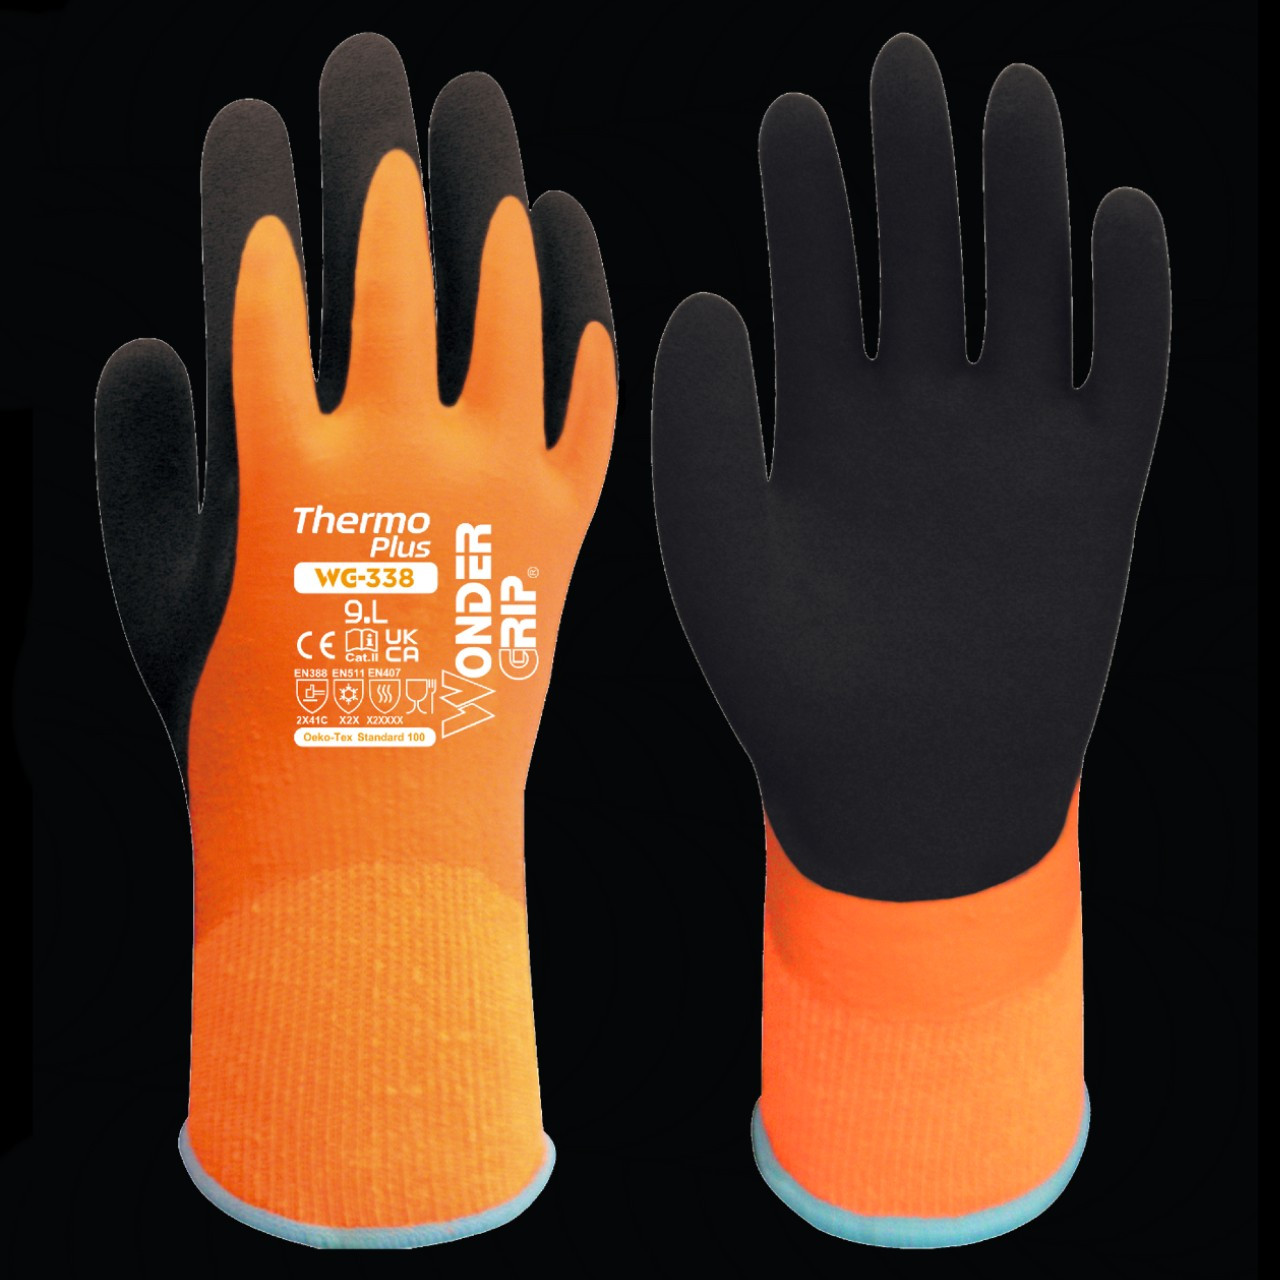 Photograph of Wonder Glove Thermo Plus Large 24